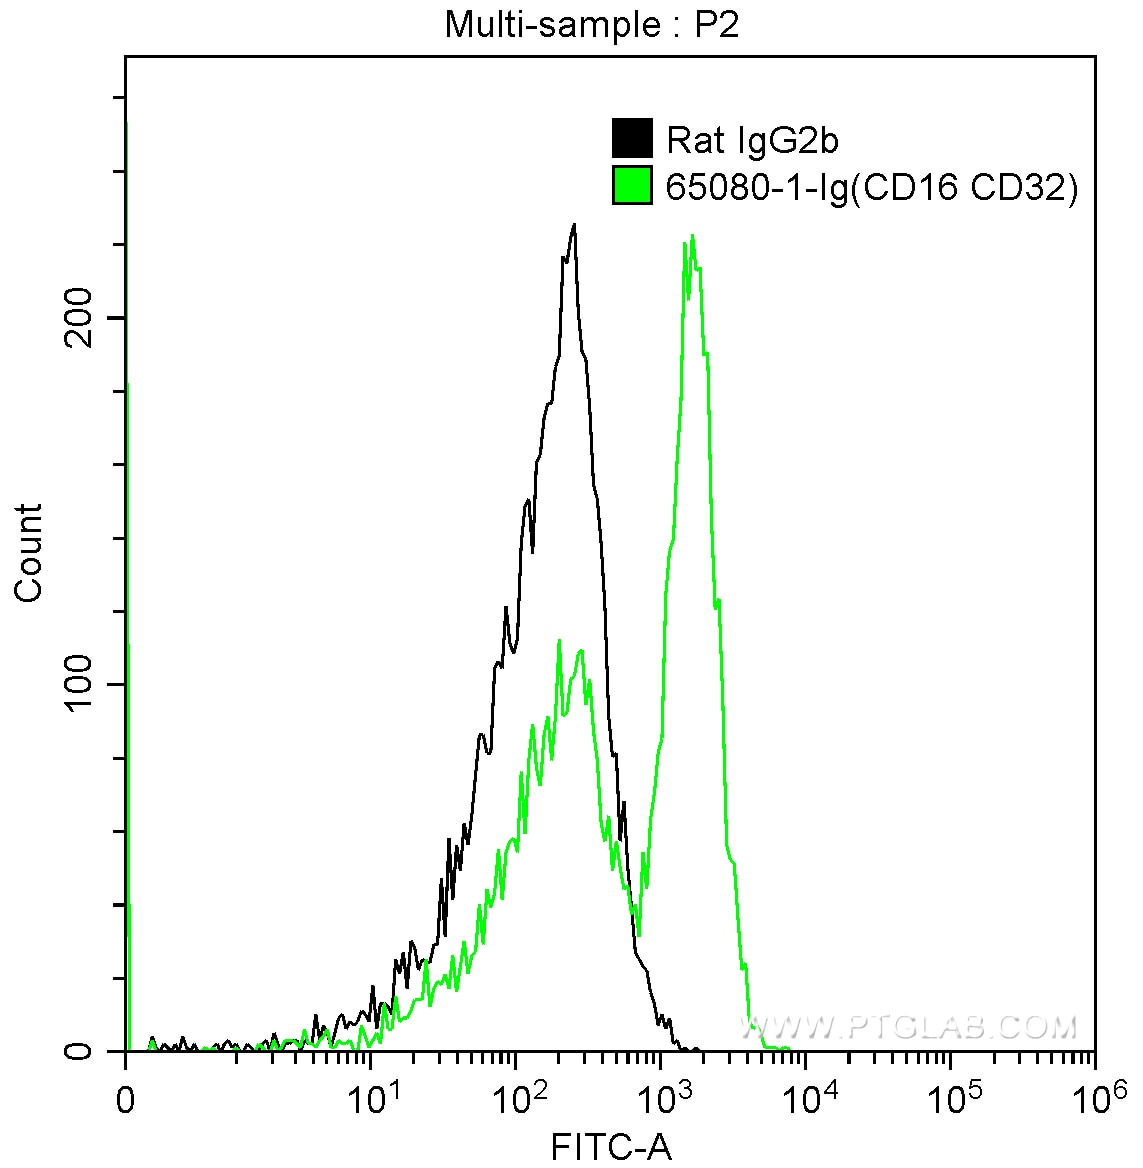 Flow cytometry (FC) experiment of mouse splenocytes using Anti-Mouse CD16 / CD32 (2.4G2) (65080-1-Ig)